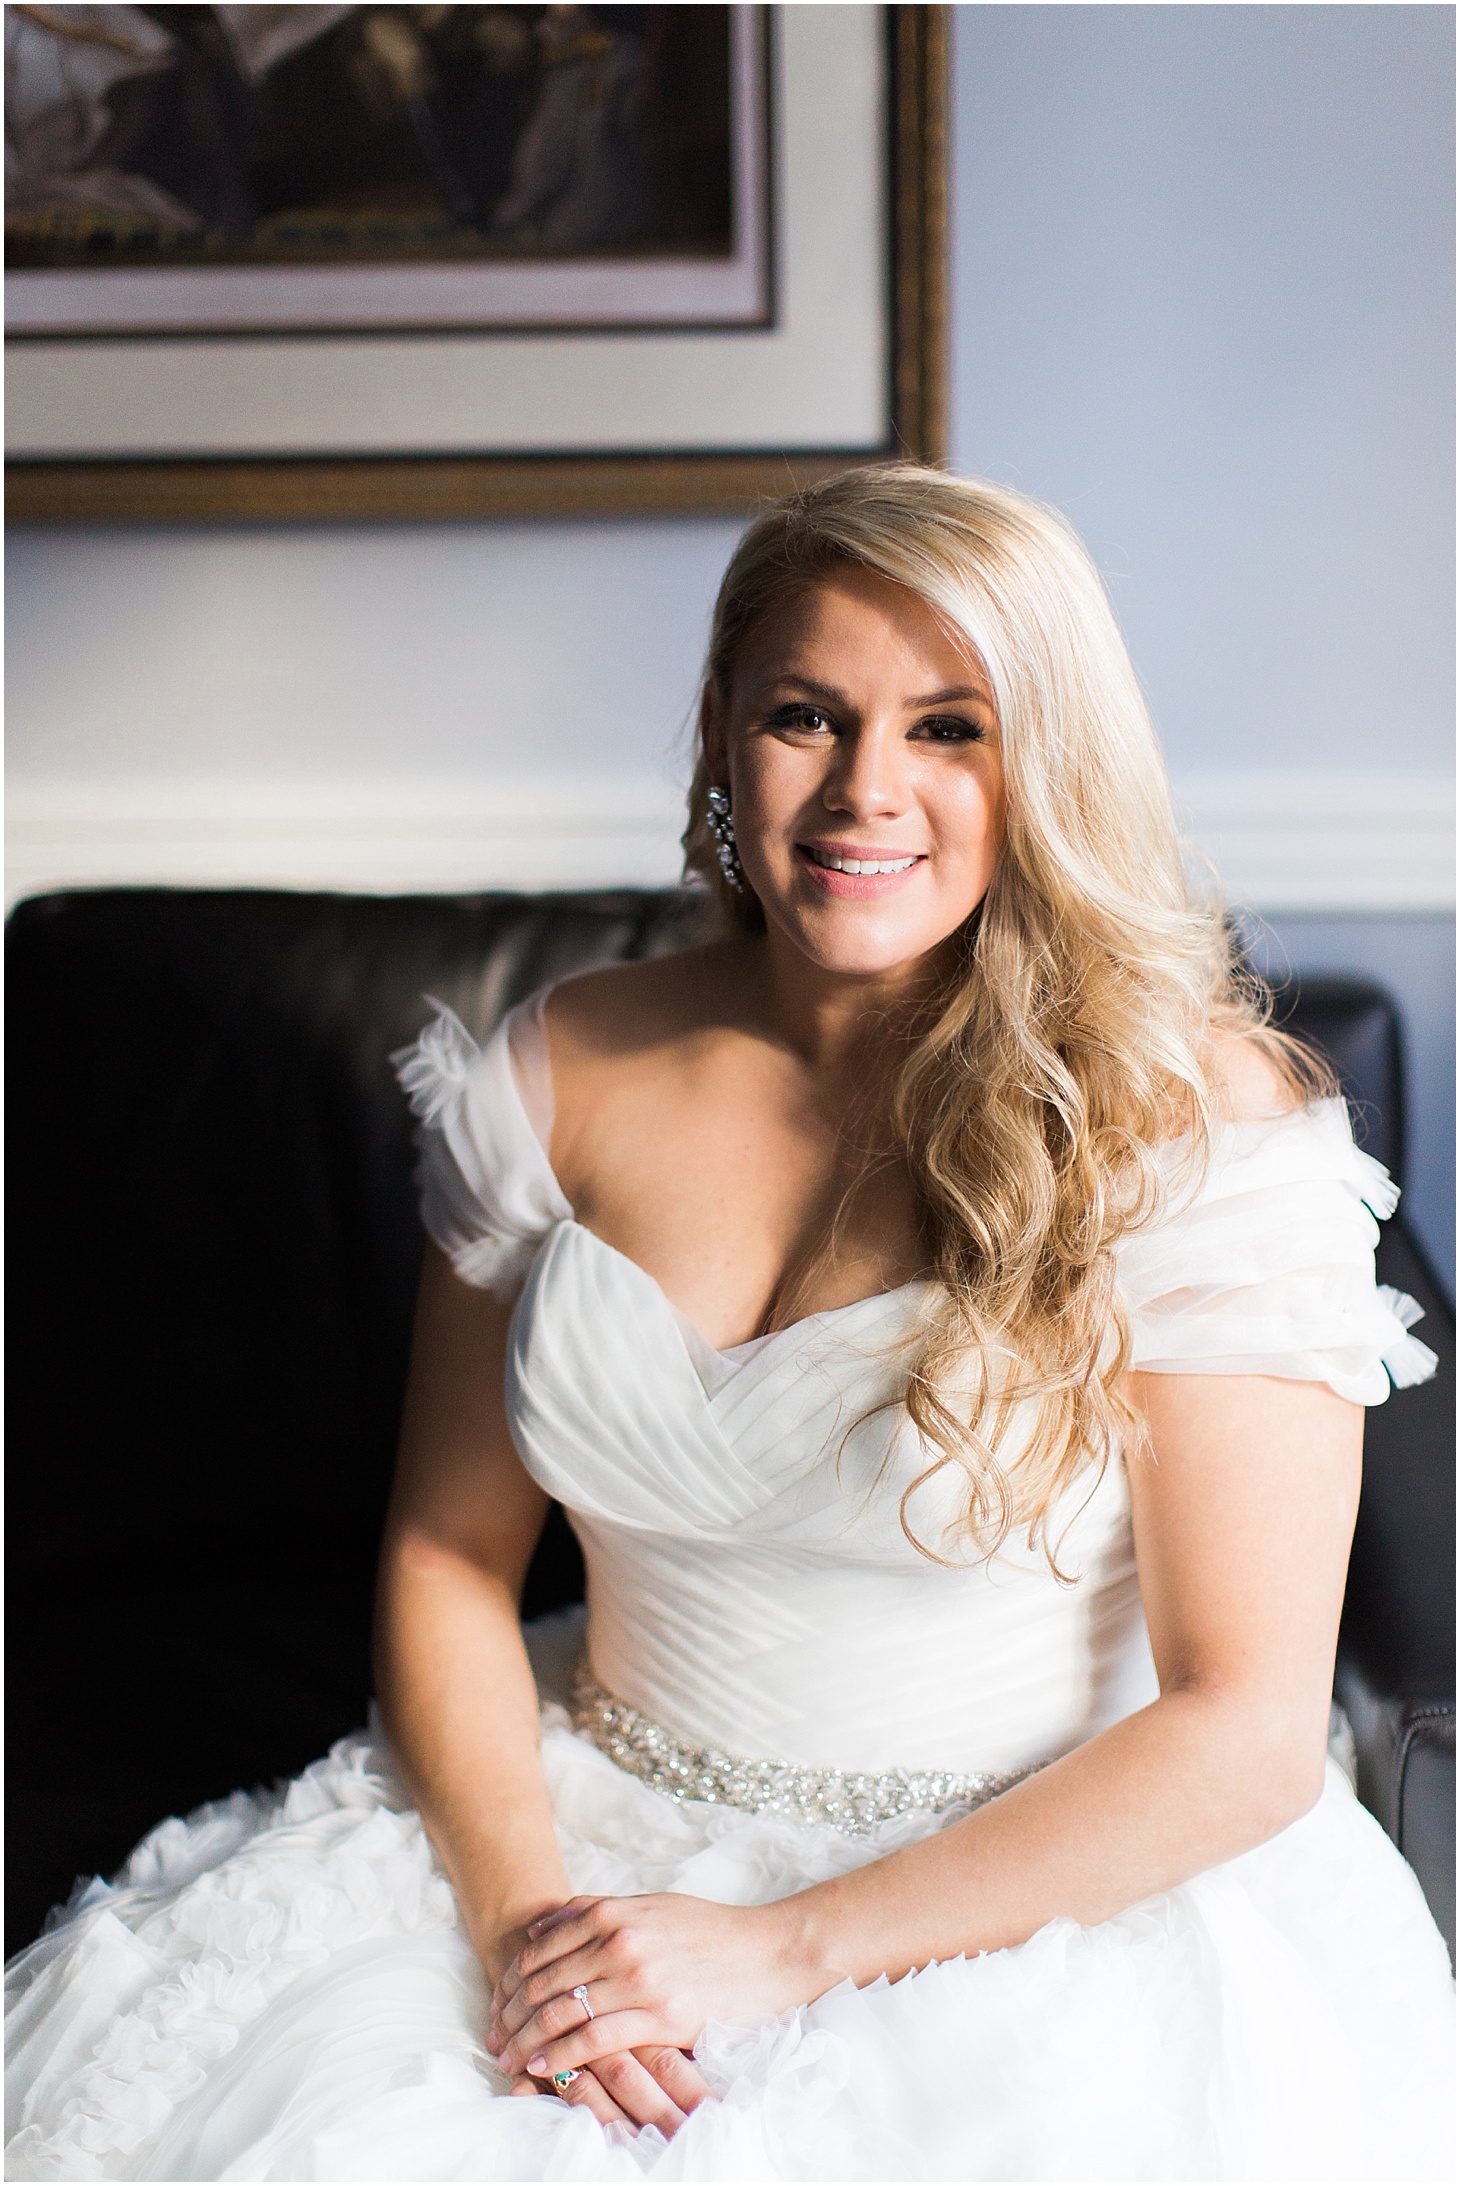 Bridal Portrait in the Washington Suite at the Army and Navy Club | Luxe Winter Wedding in Washington, DC | Sarah Bradshaw Photography | Washington DC Wedding Photographer